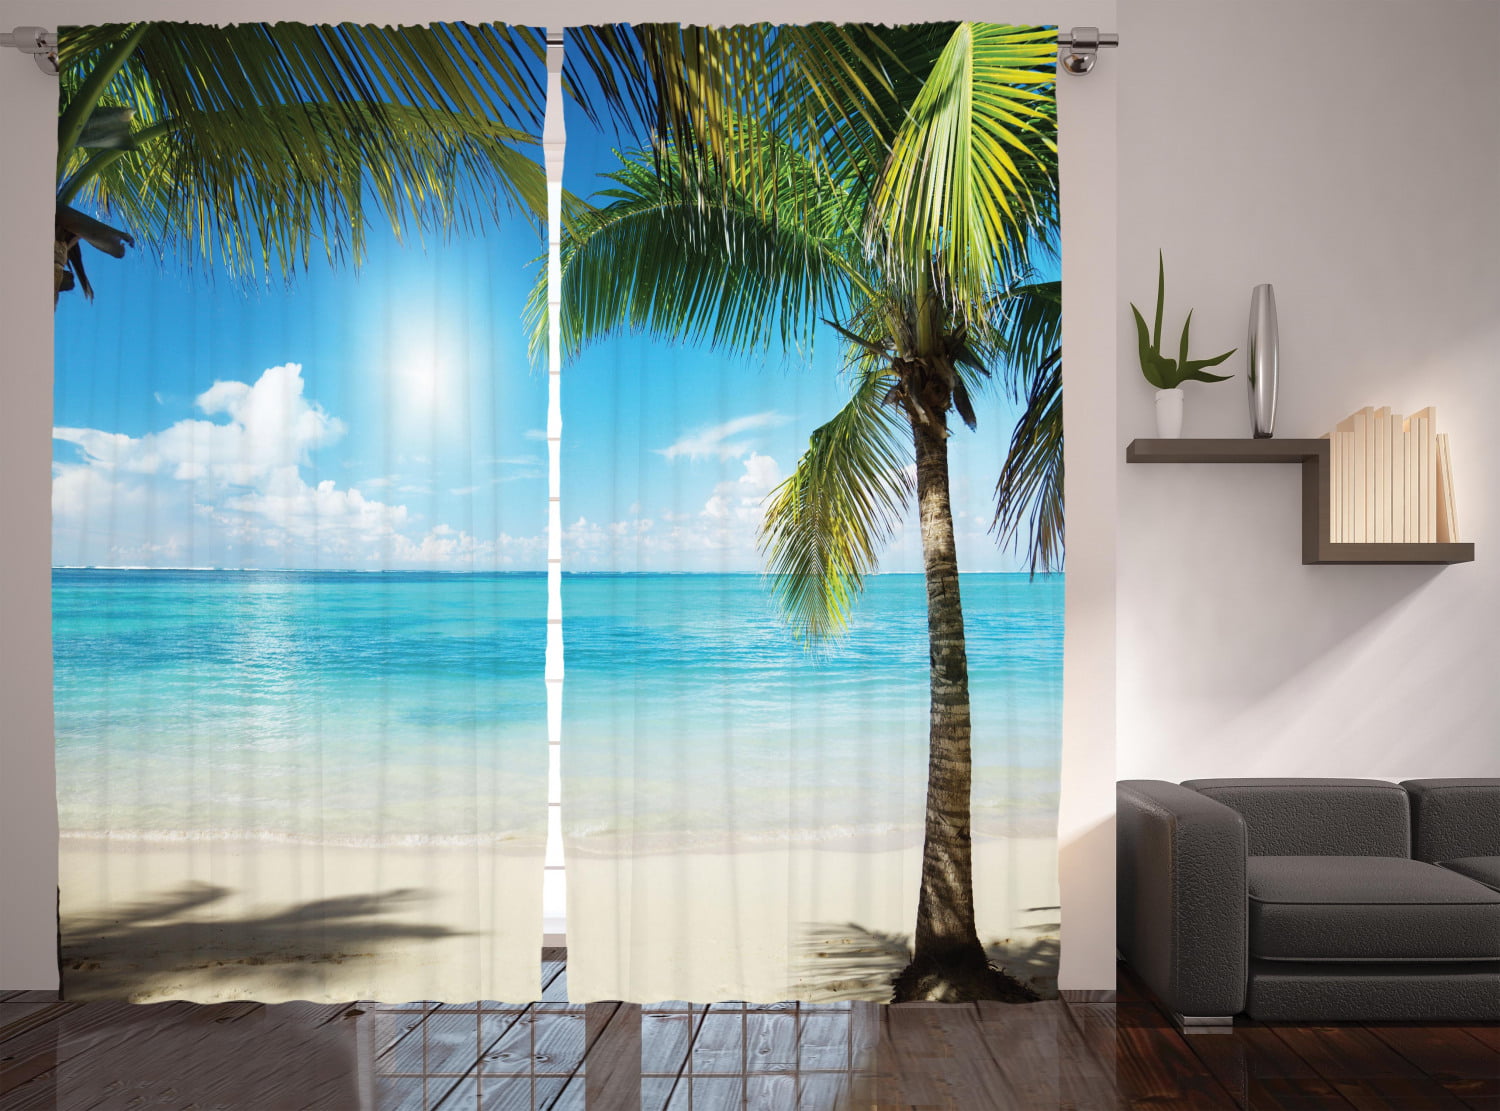 Tropic Curtains Coconut Palm Tree Plants Window Drapes 2 Panel Set 108x84 Inches 